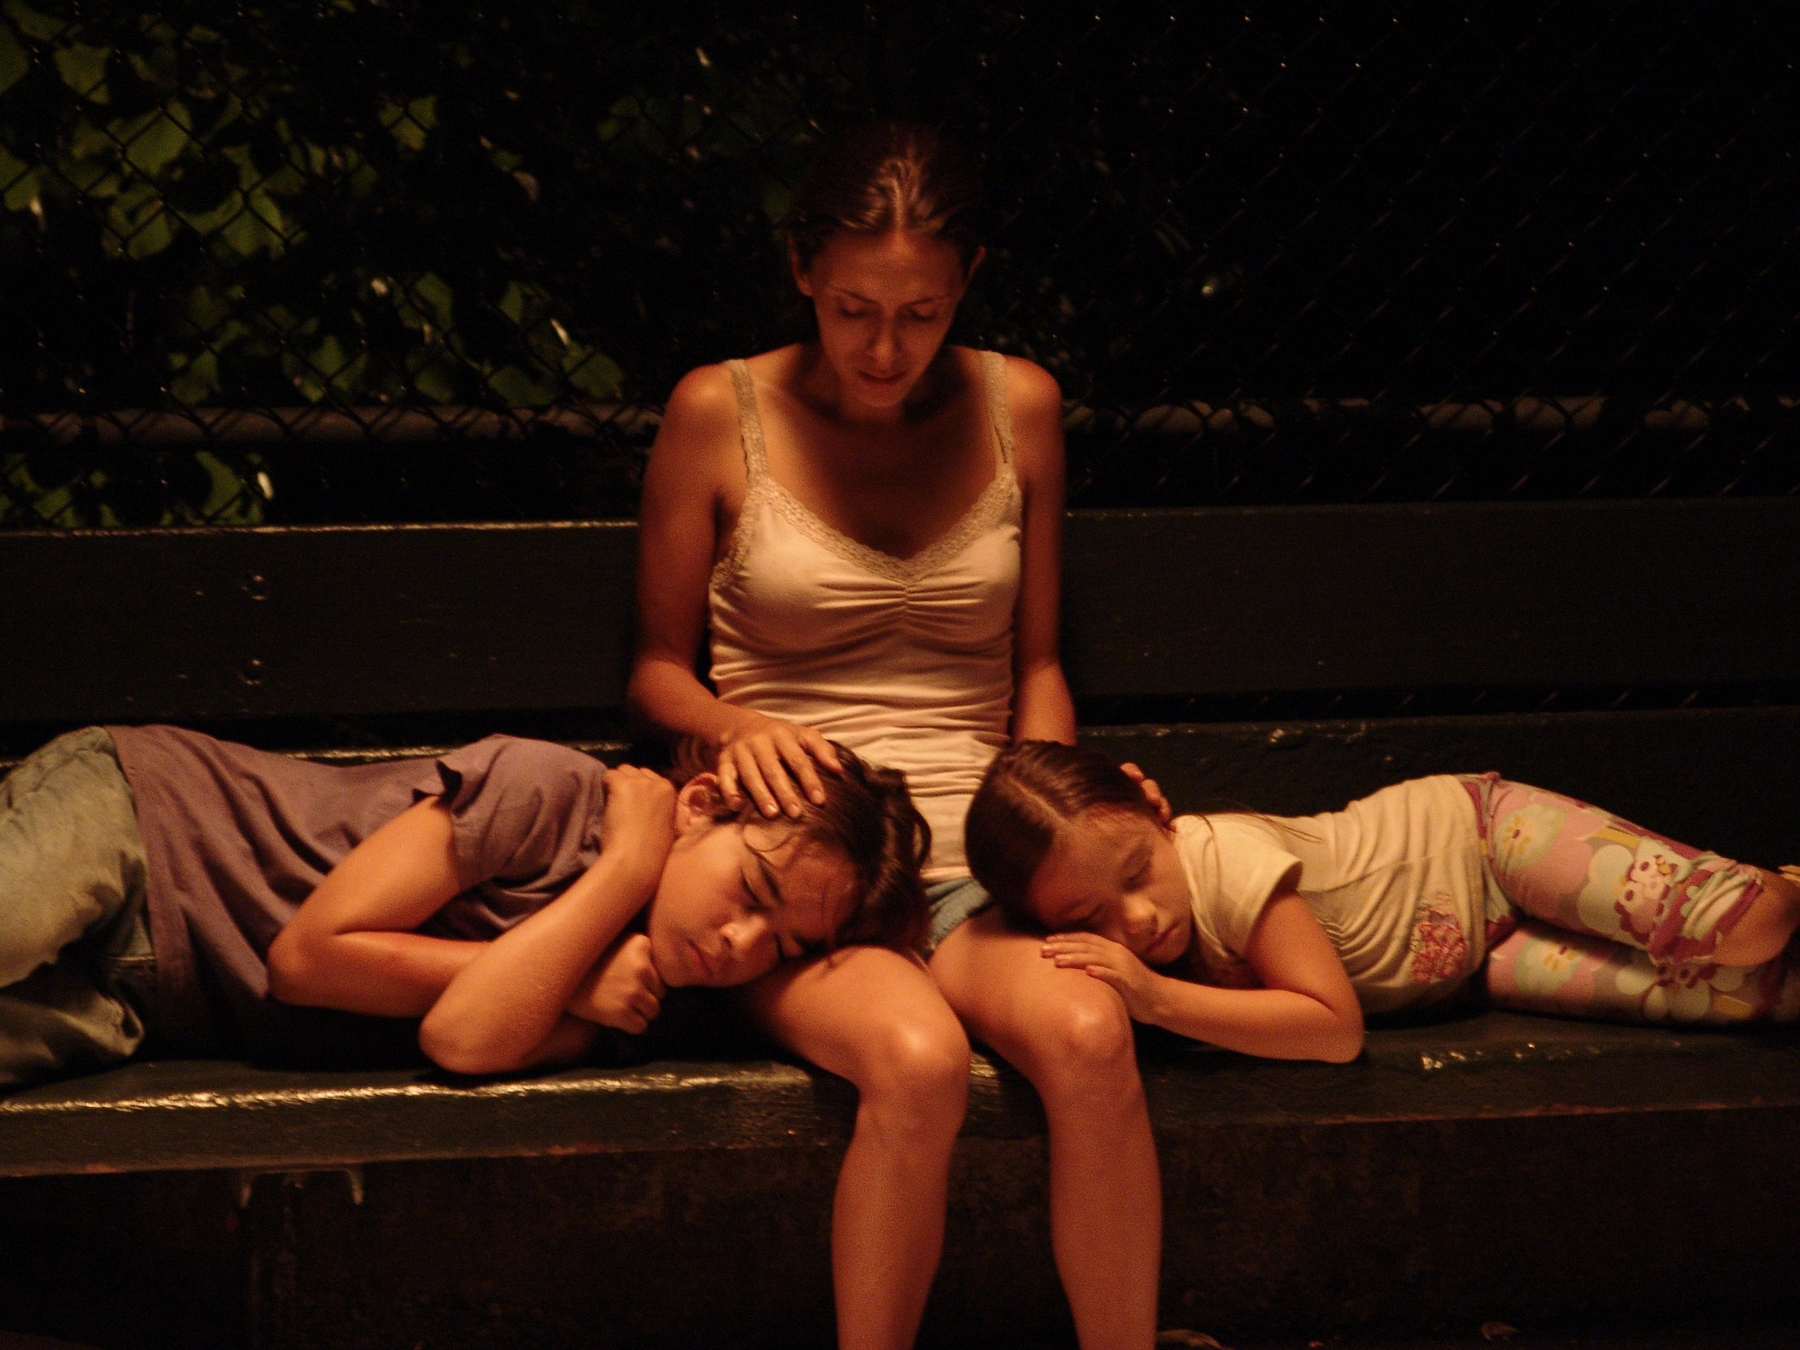 Still from "Lupe Under the Sun," written and directed by Rodrigo Reyes